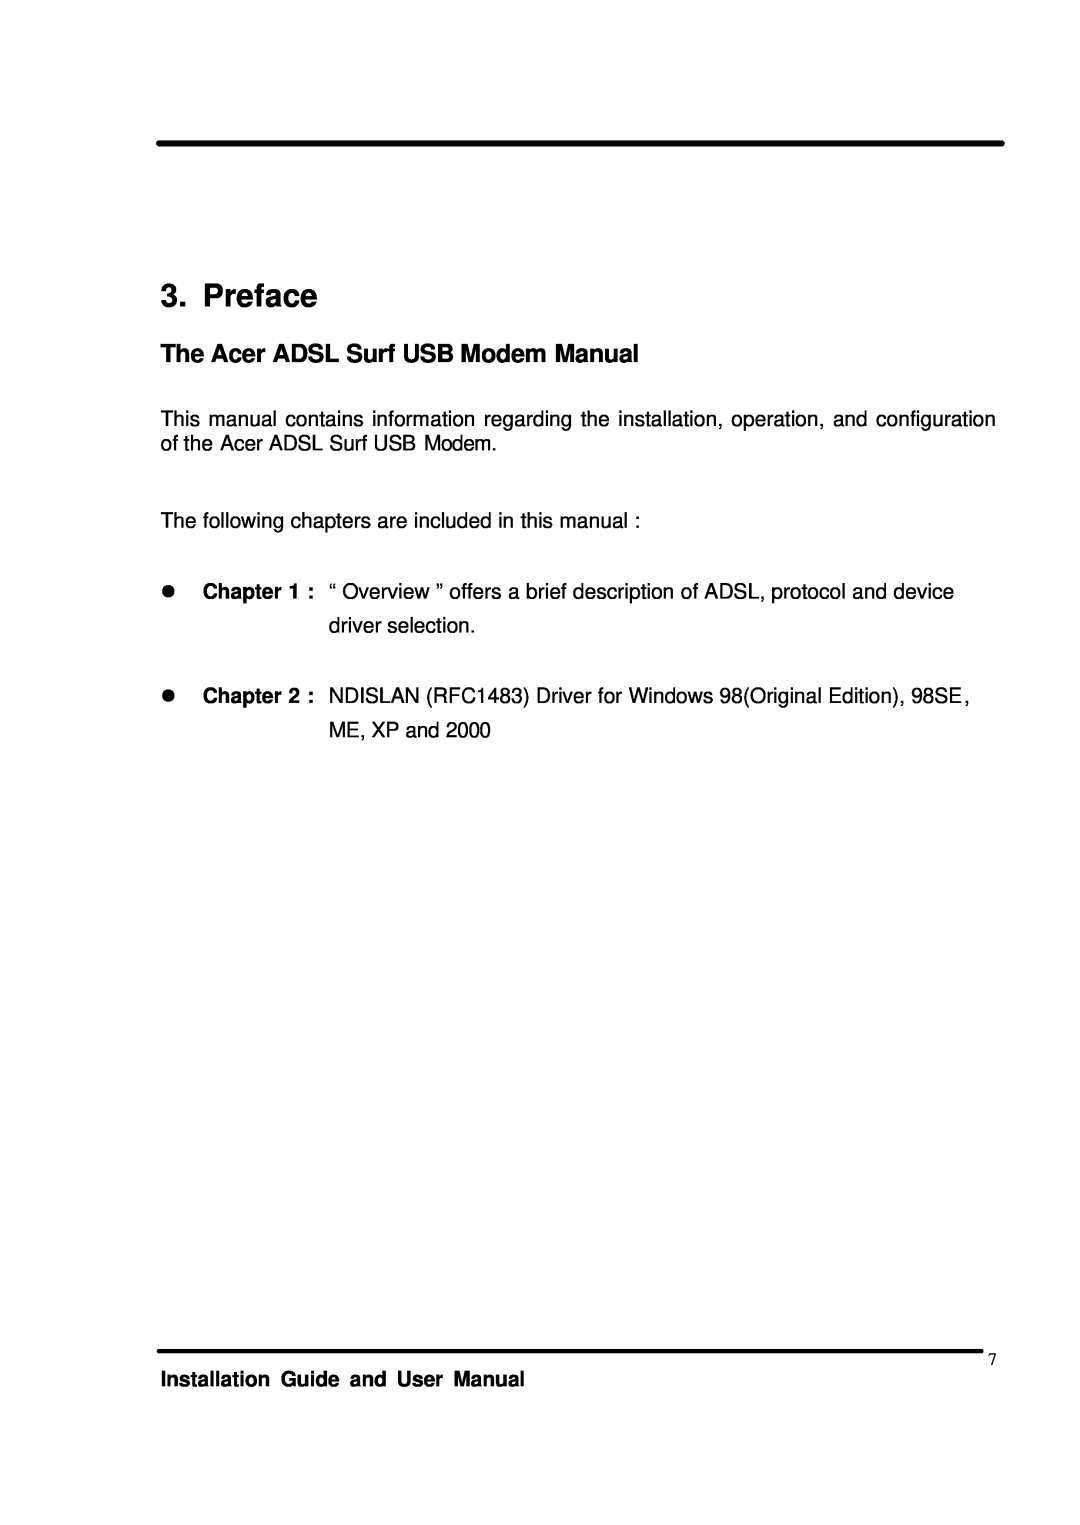 Acer user manual Preface, The Acer ADSL Surf USB Modem Manual, Installation Guide and User Manual 